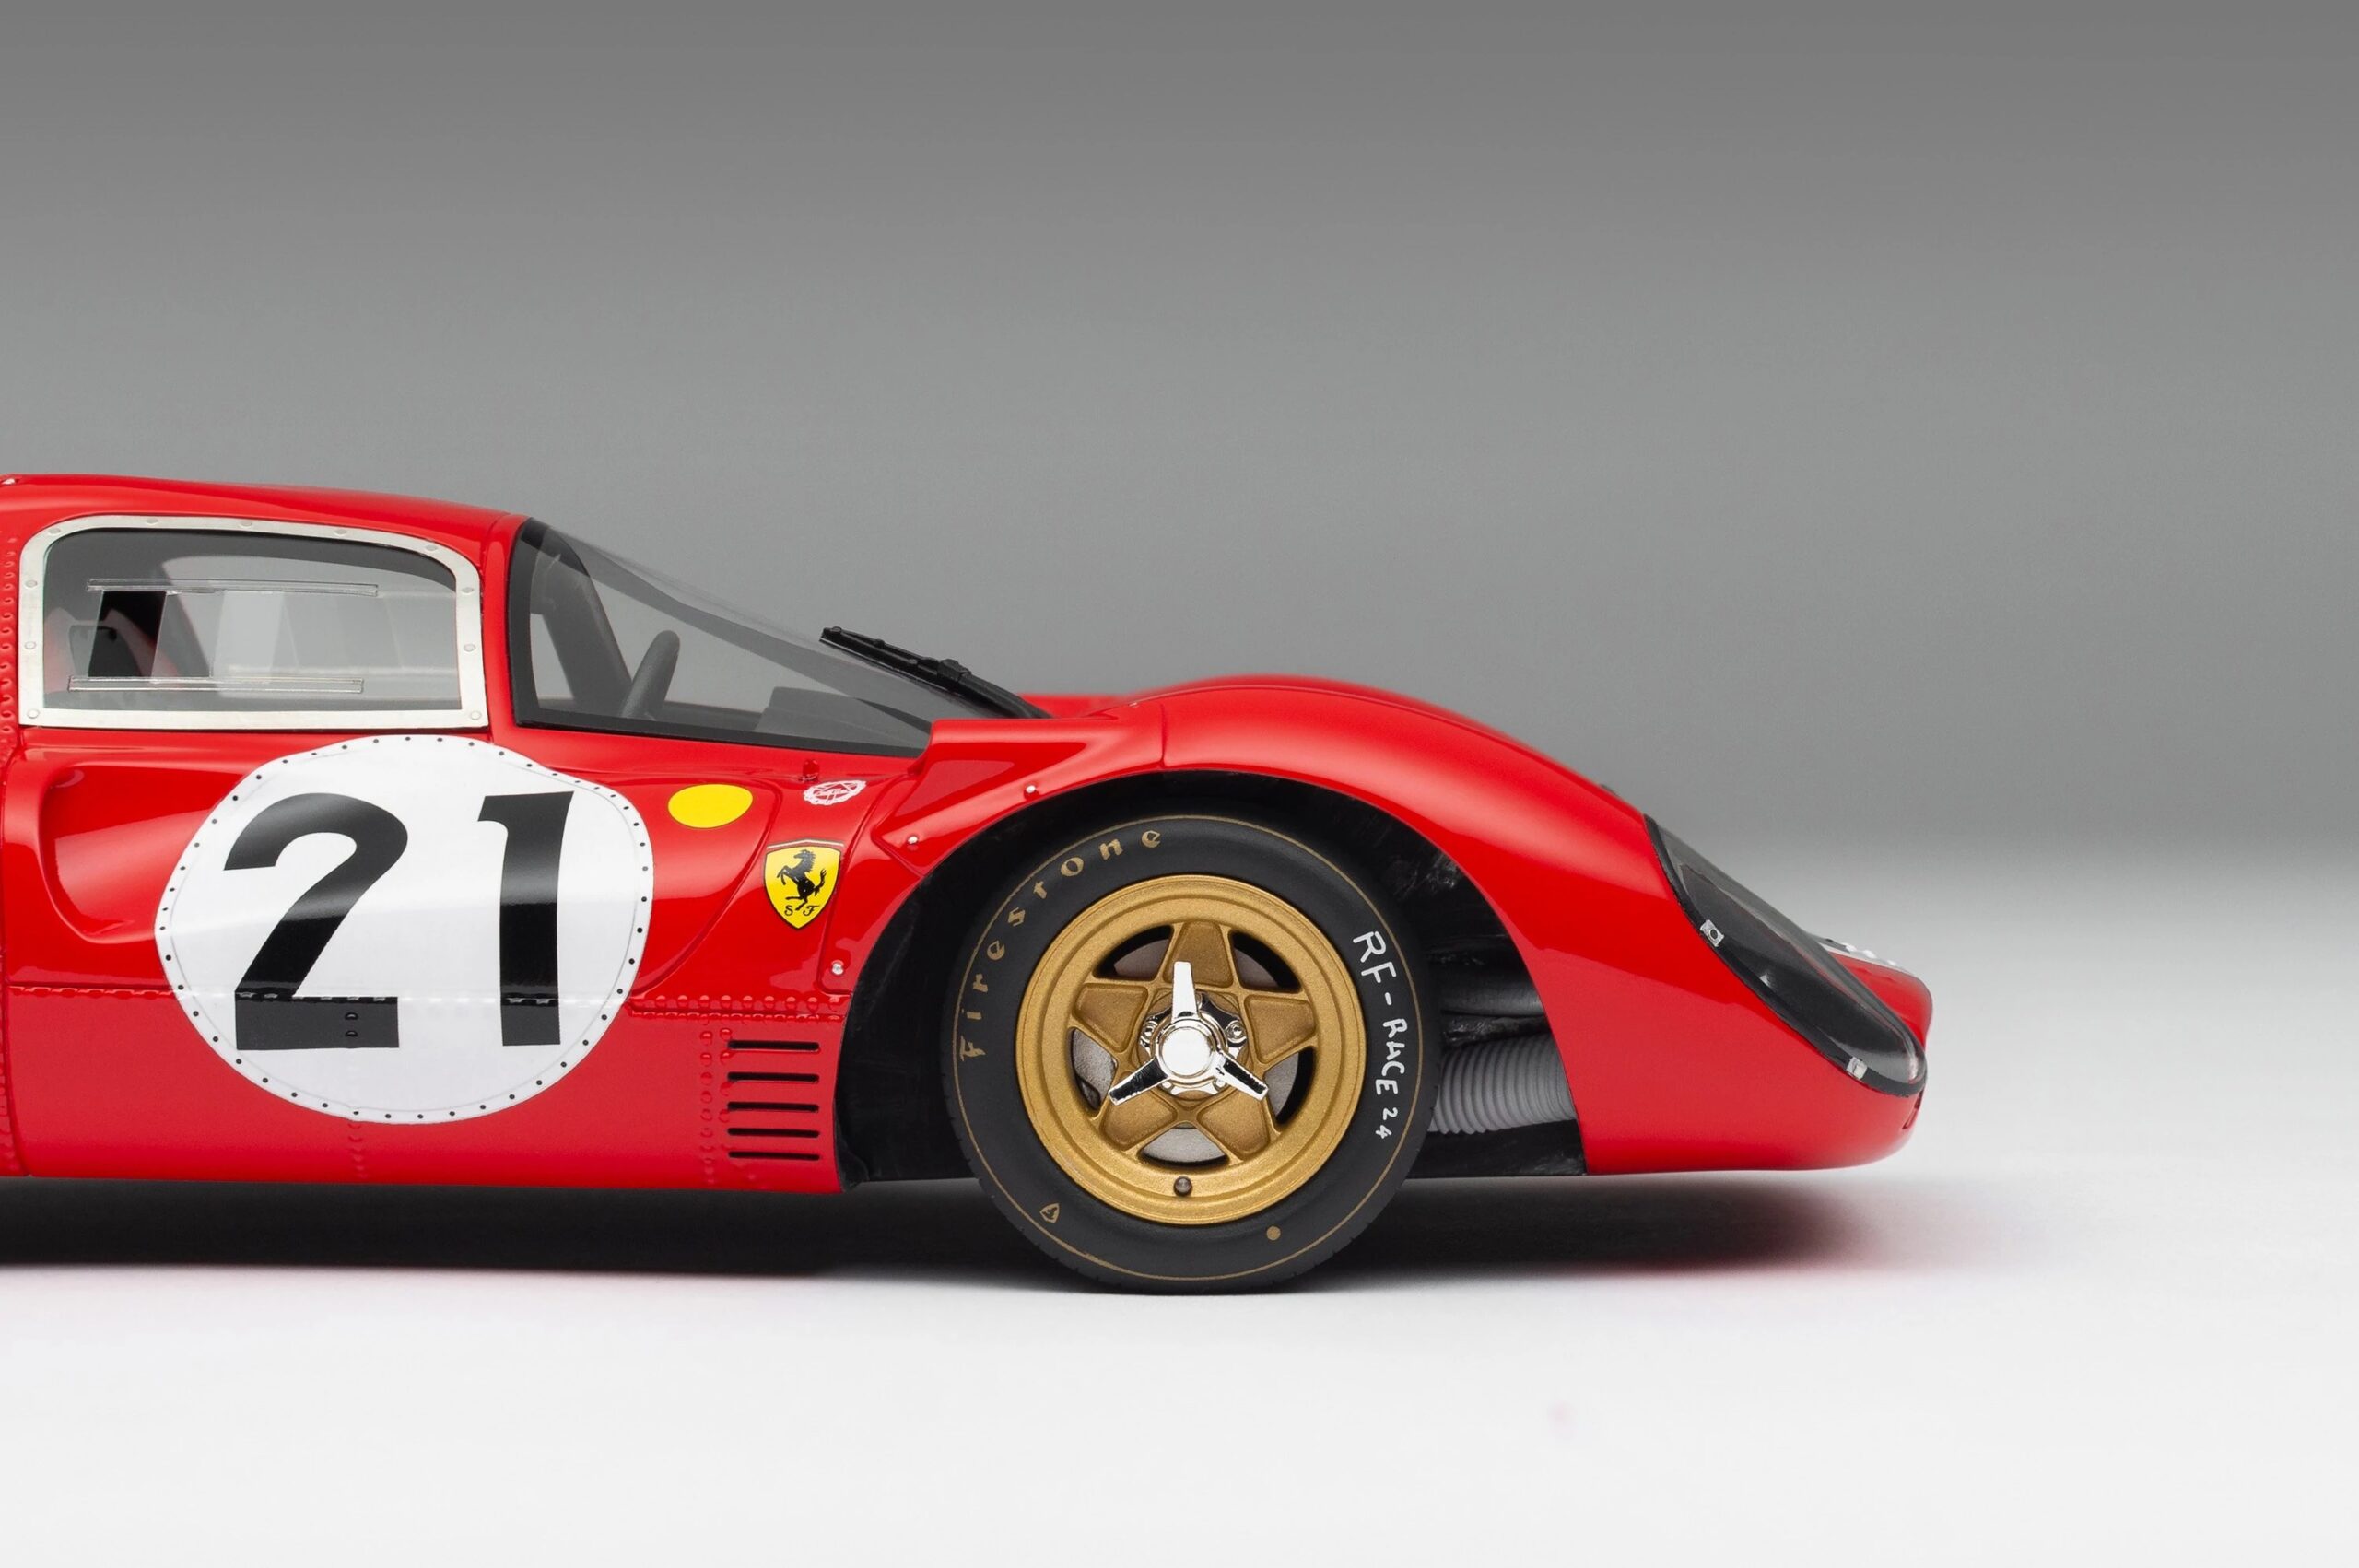 M5933 127 Ferrari 330 P4 0858GT 1.18 Scale Front End Detail Side On 4000x2677 crop center.jpg 2 scaled